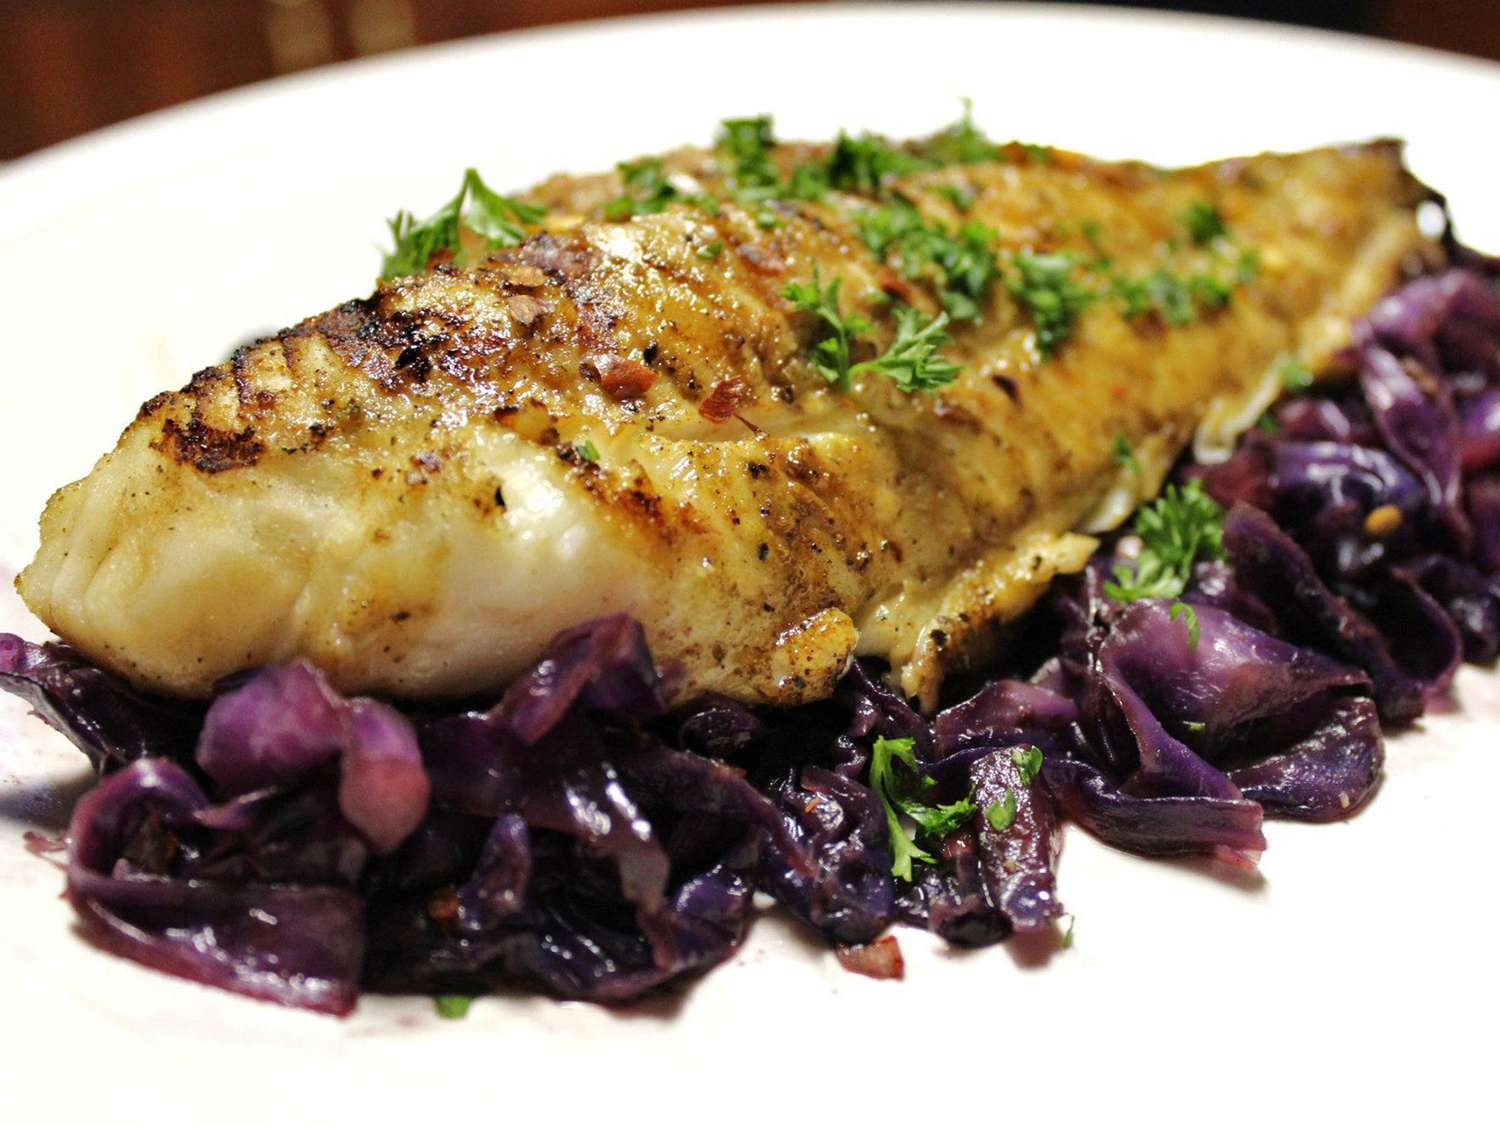 close up view of a Grilled Fish Steak garnished with herbs on a bed of red cabbage on a platter